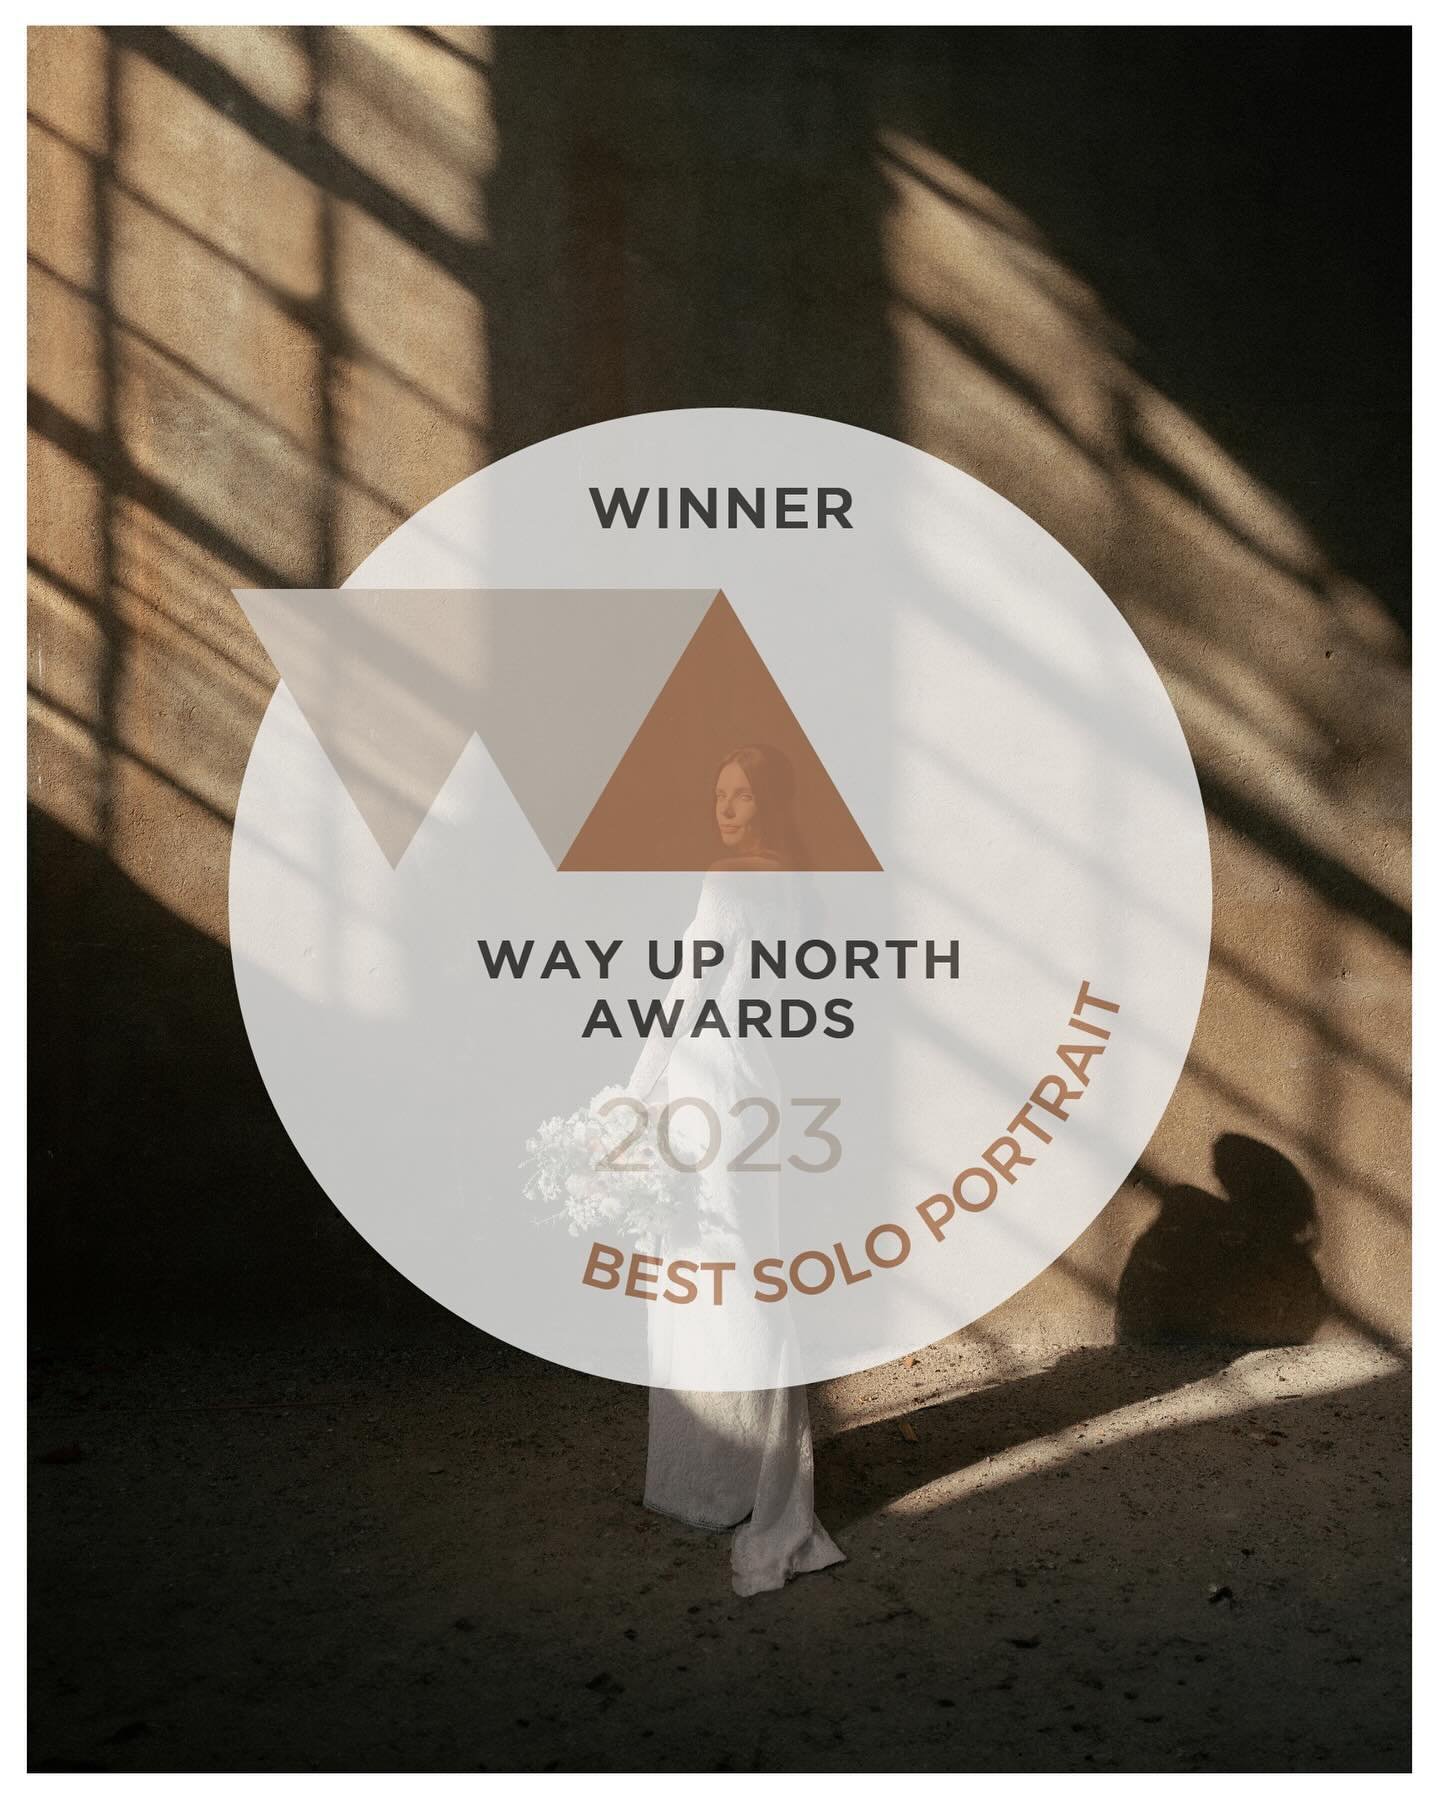 Last week in Florence I received two awards during a conference for wedding photographers from all over the world. That&rsquo;s insane! Thank you @wayupnorth for all of this. 

Also, I want to thank all the beautiful people for spicing up my life wit